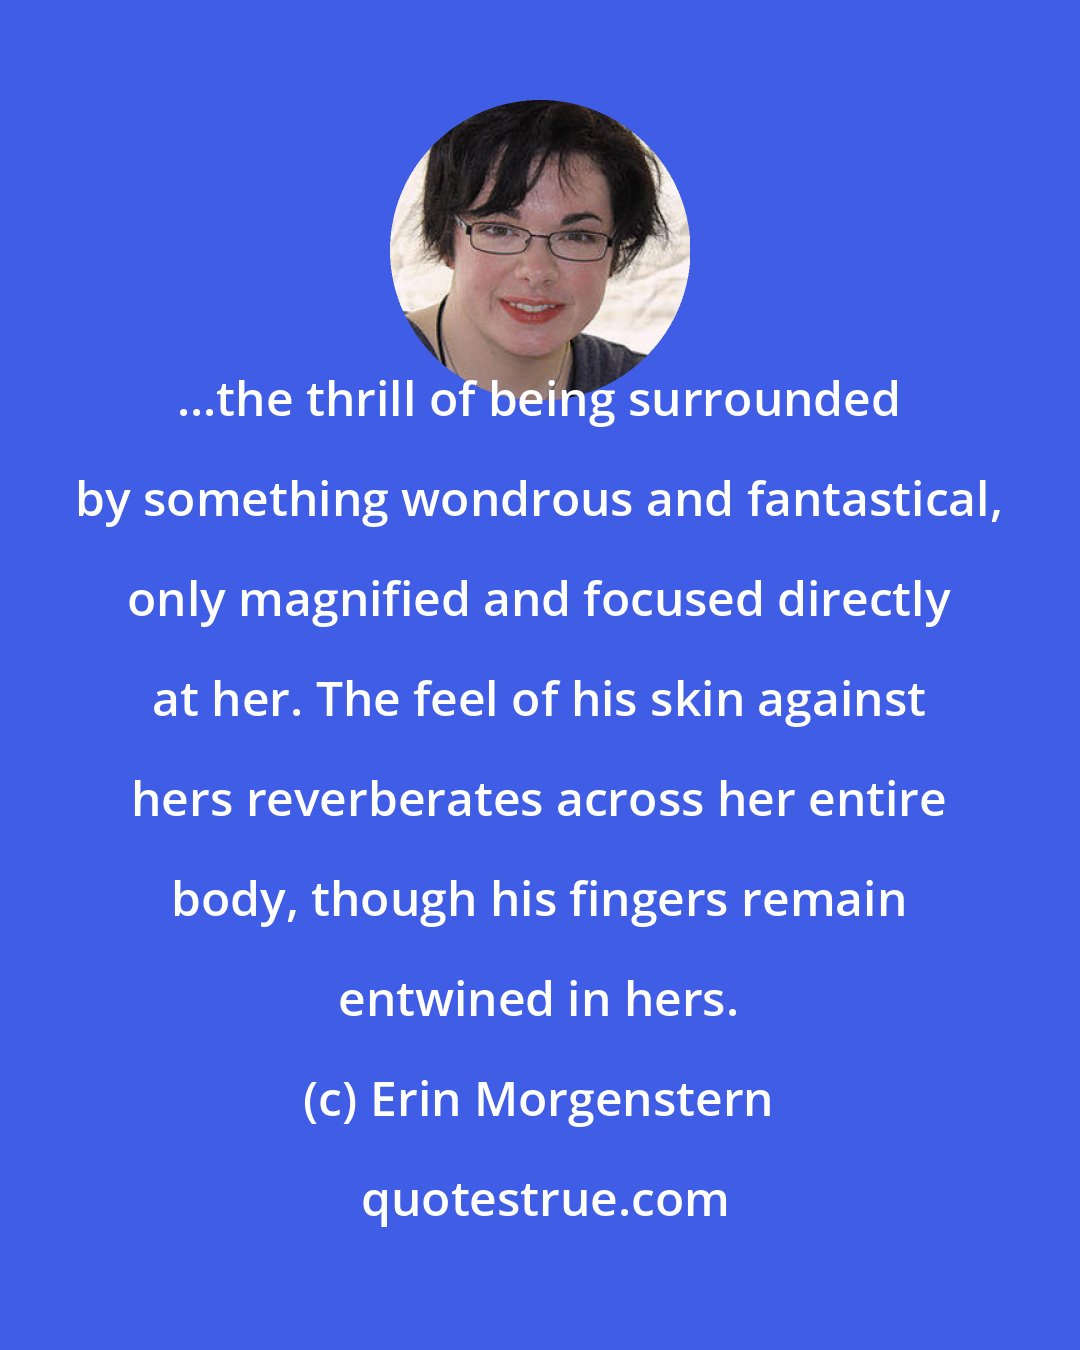 Erin Morgenstern: ...the thrill of being surrounded by something wondrous and fantastical, only magnified and focused directly at her. The feel of his skin against hers reverberates across her entire body, though his fingers remain entwined in hers.